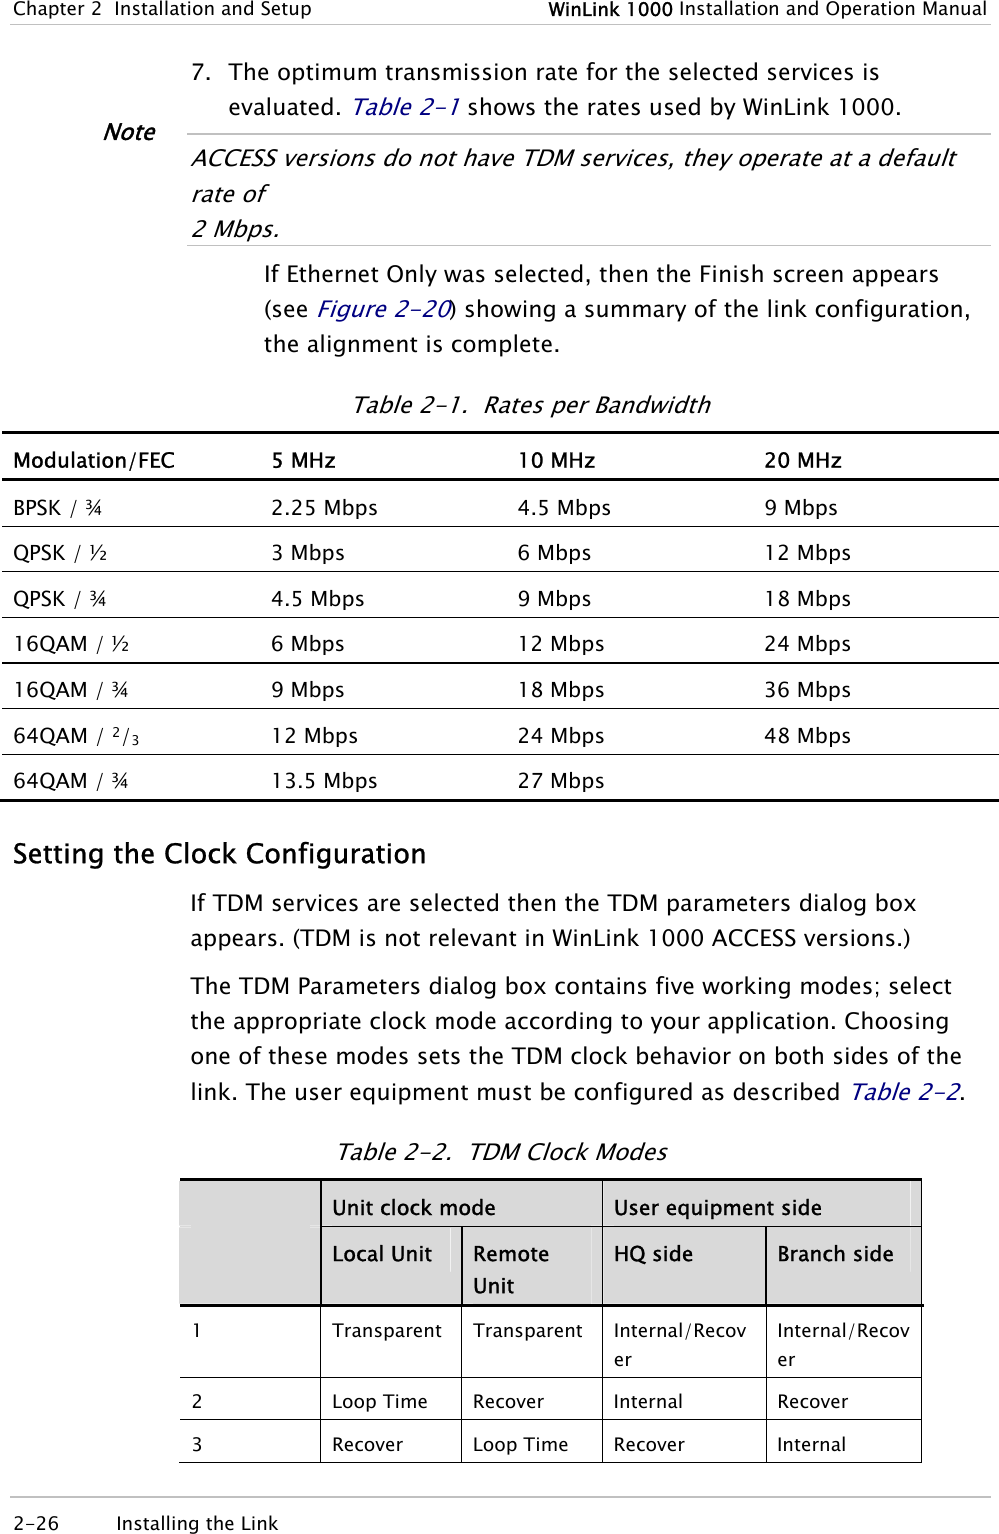 Chapter  2  Installation and Setup  WinLink 1000 Installation and Operation Manual 7. The optimum transmission rate for the selected services is evaluated. Table  2-1 shows the rates used by WinLink 1000.  ACCESS versions do not have TDM services, they operate at a default rate of 2 Mbps.  If Ethernet Only was selected, then the Finish screen appears  (see Figure  2-20) showing a summary of the link configuration, the alignment is complete. Table  2-1.  Rates per Bandwidth Modulation/FEC  5 MHz  10 MHz  20 MHz BPSK / ¾  2.25 Mbps  4.5 Mbps  9 Mbps QPSK / ½   3 Mbps  6 Mbps  12 Mbps QPSK / ¾   4.5 Mbps  9 Mbps  18 Mbps 16QAM / ½   6 Mbps  12 Mbps  24 Mbps 16QAM / ¾   9 Mbps  18 Mbps  36 Mbps 64QAM / 2/3   12 Mbps  24 Mbps  48 Mbps 64QAM / ¾   13.5 Mbps  27 Mbps   Setting the Clock Configuration If TDM services are selected then the TDM parameters dialog box appears. (TDM is not relevant in WinLink 1000 ACCESS versions.) The TDM Parameters dialog box contains five working modes; select the appropriate clock mode according to your application. Choosing one of these modes sets the TDM clock behavior on both sides of the link. The user equipment must be configured as described Table  2-2. Table  2-2.  TDM Clock Modes  Unit clock mode  User equipment side  Local Unit  Remote Unit HQ side  Branch side 1  Transparent Transparent Internal/Recover Internal/Recover 2 Loop Time Recover Internal Recover 3 Recover Loop Time Recover Internal Note 2-26 Installing the Link   